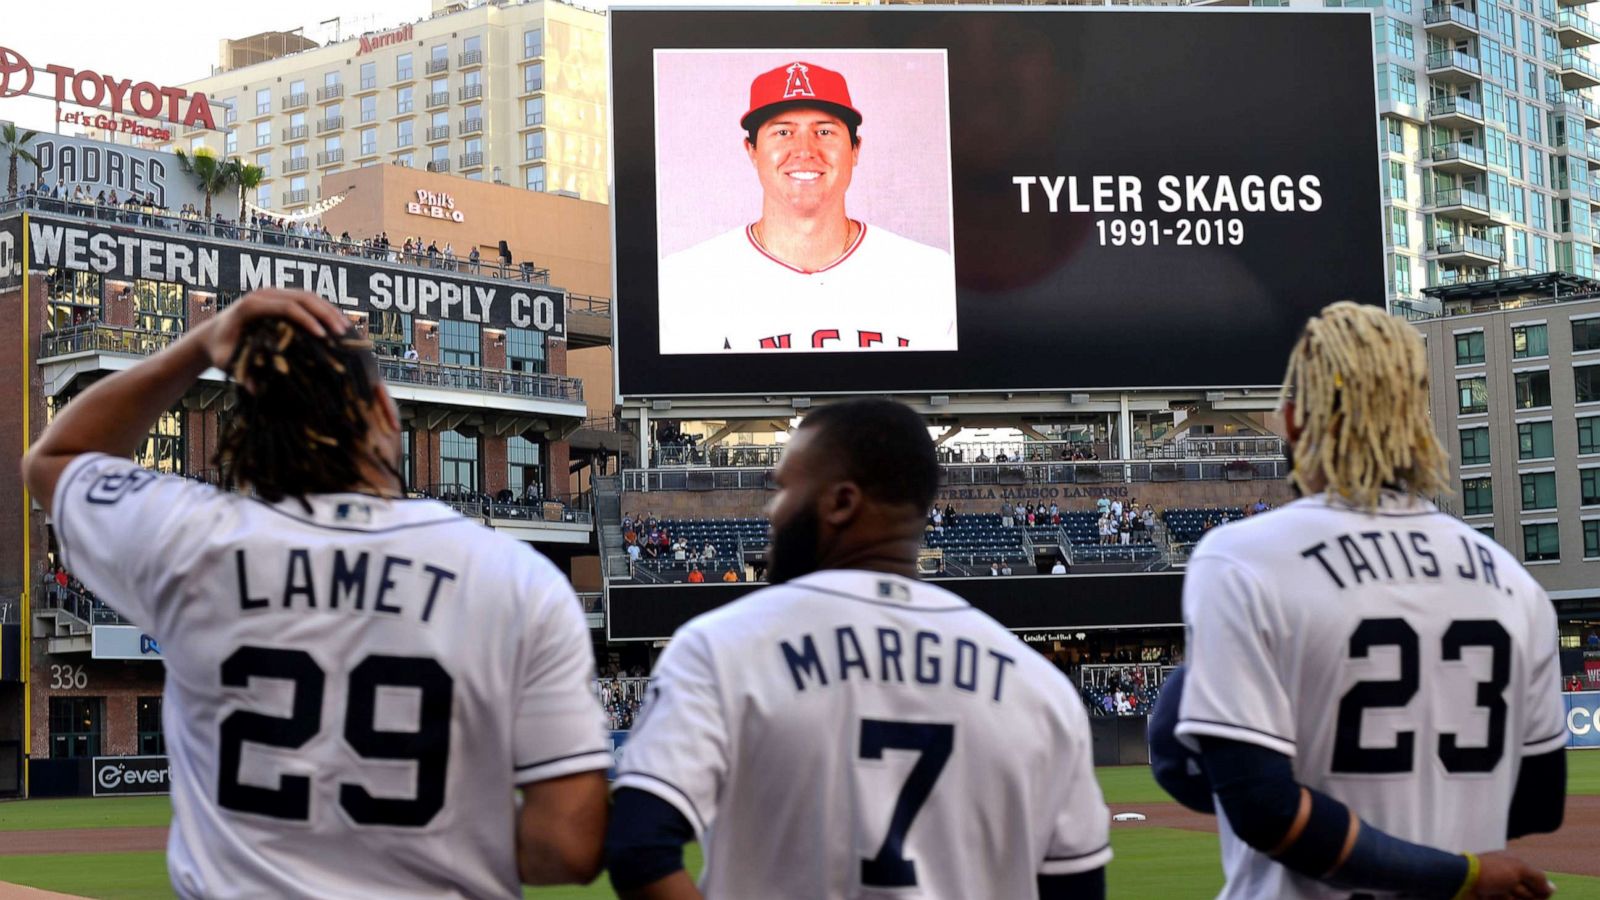 Angels and Rangers will play with heavy hearts a day after Tyler Skaggs'  death - Los Angeles Times